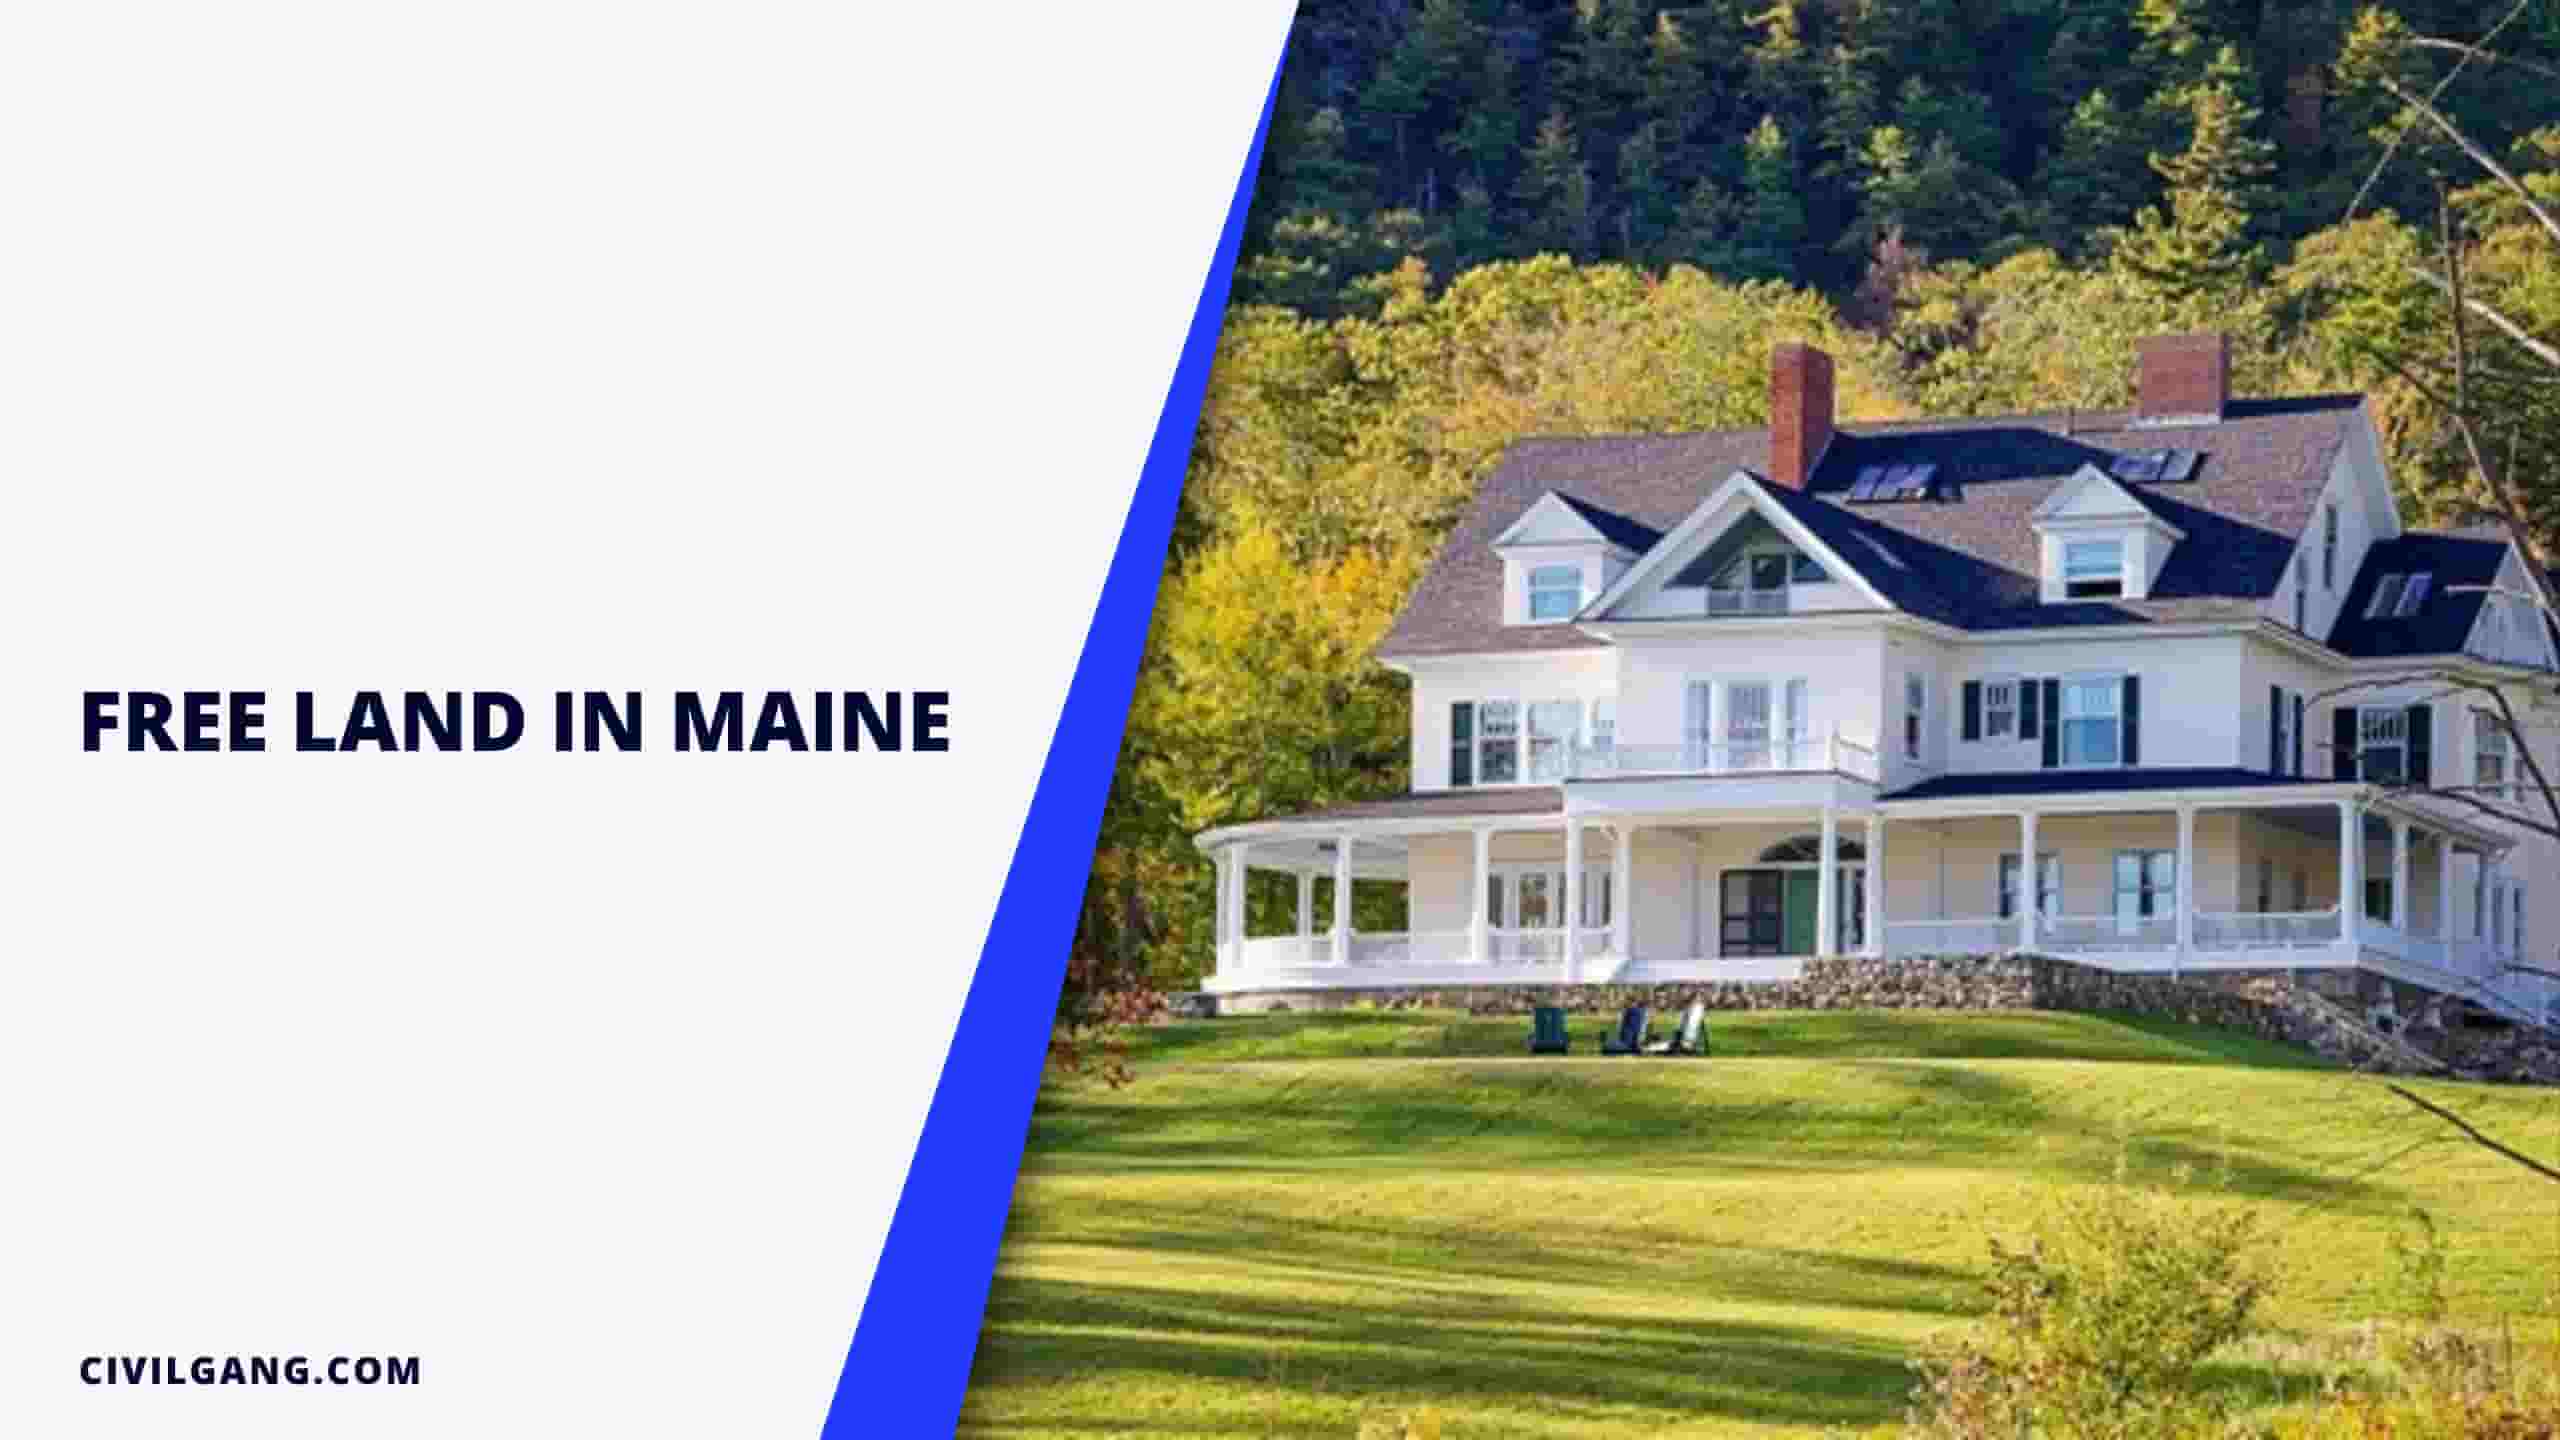 Free Land in Maine